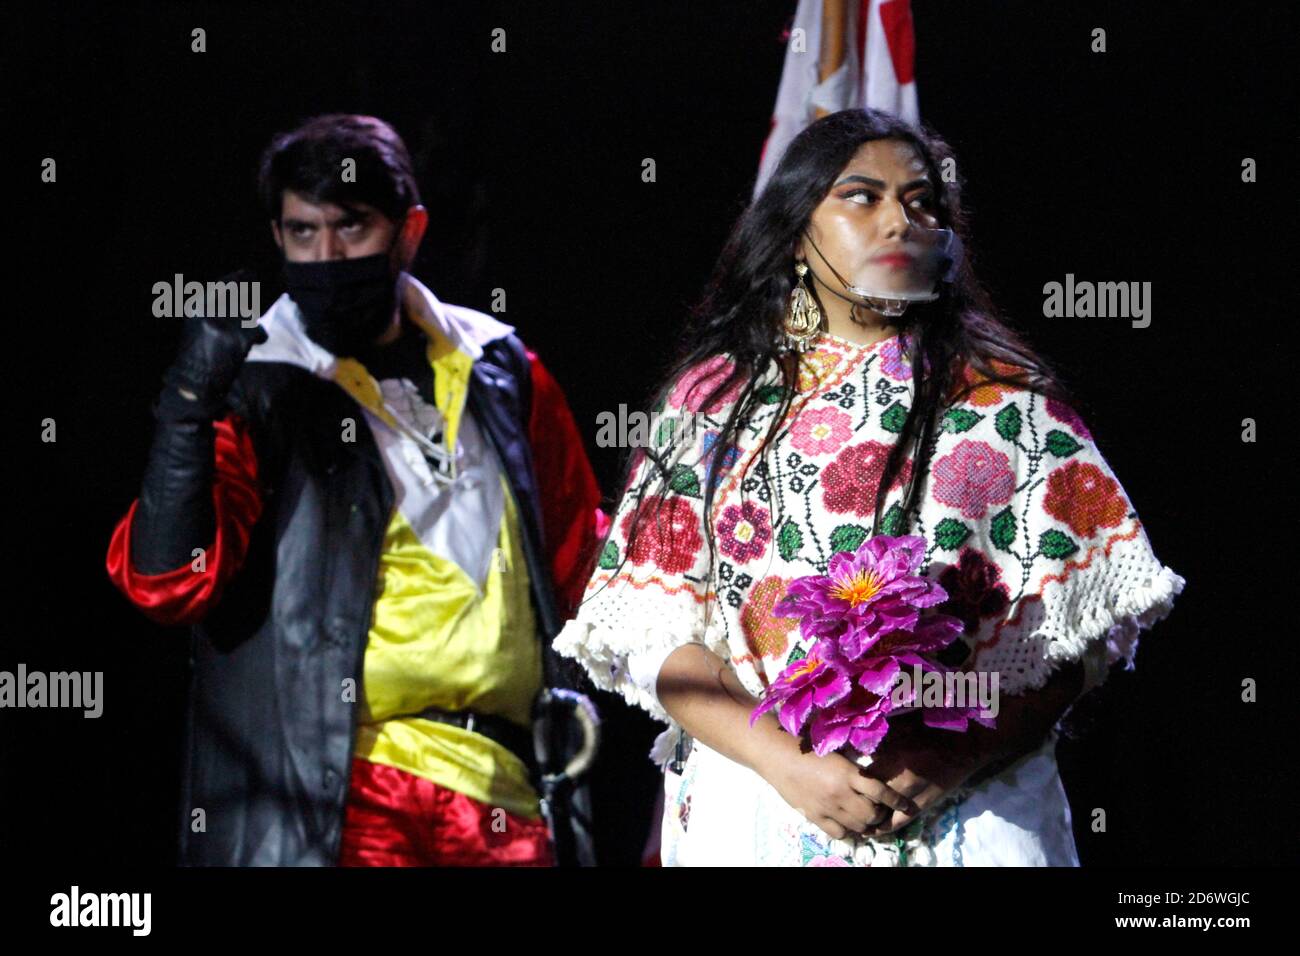 Non Exclusive: MEXICO CITY, MEXICO - OCTOBER 18: A person performs during the show of the Legend of the weeping woman (La llorona), who is a pre-hispa Stock Photo